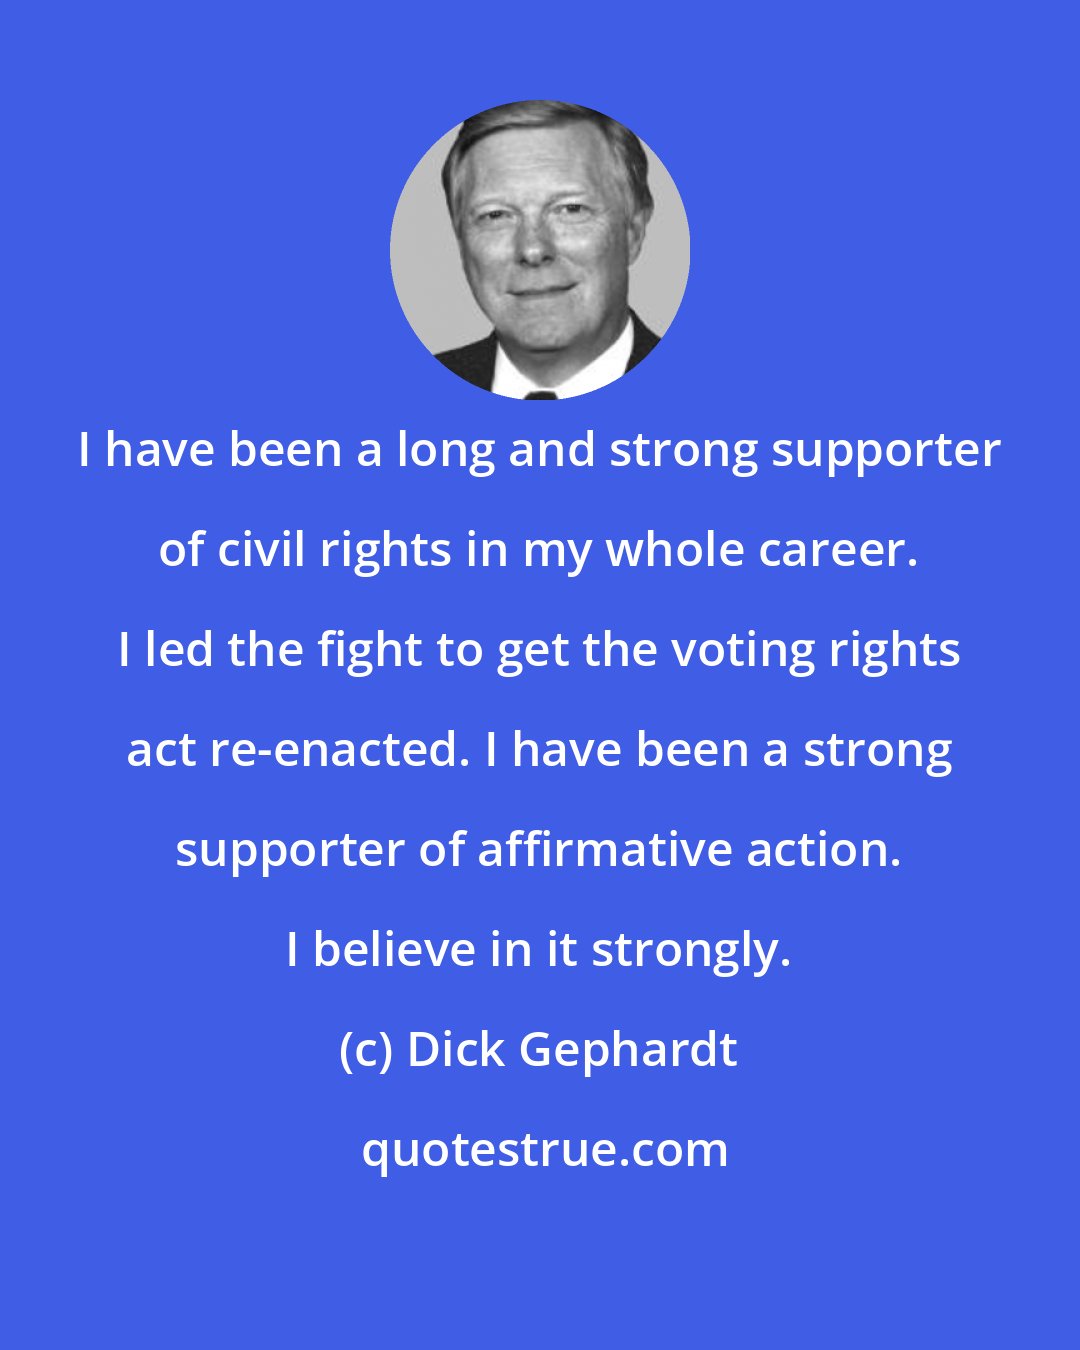 Dick Gephardt: I have been a long and strong supporter of civil rights in my whole career. I led the fight to get the voting rights act re-enacted. I have been a strong supporter of affirmative action. I believe in it strongly.